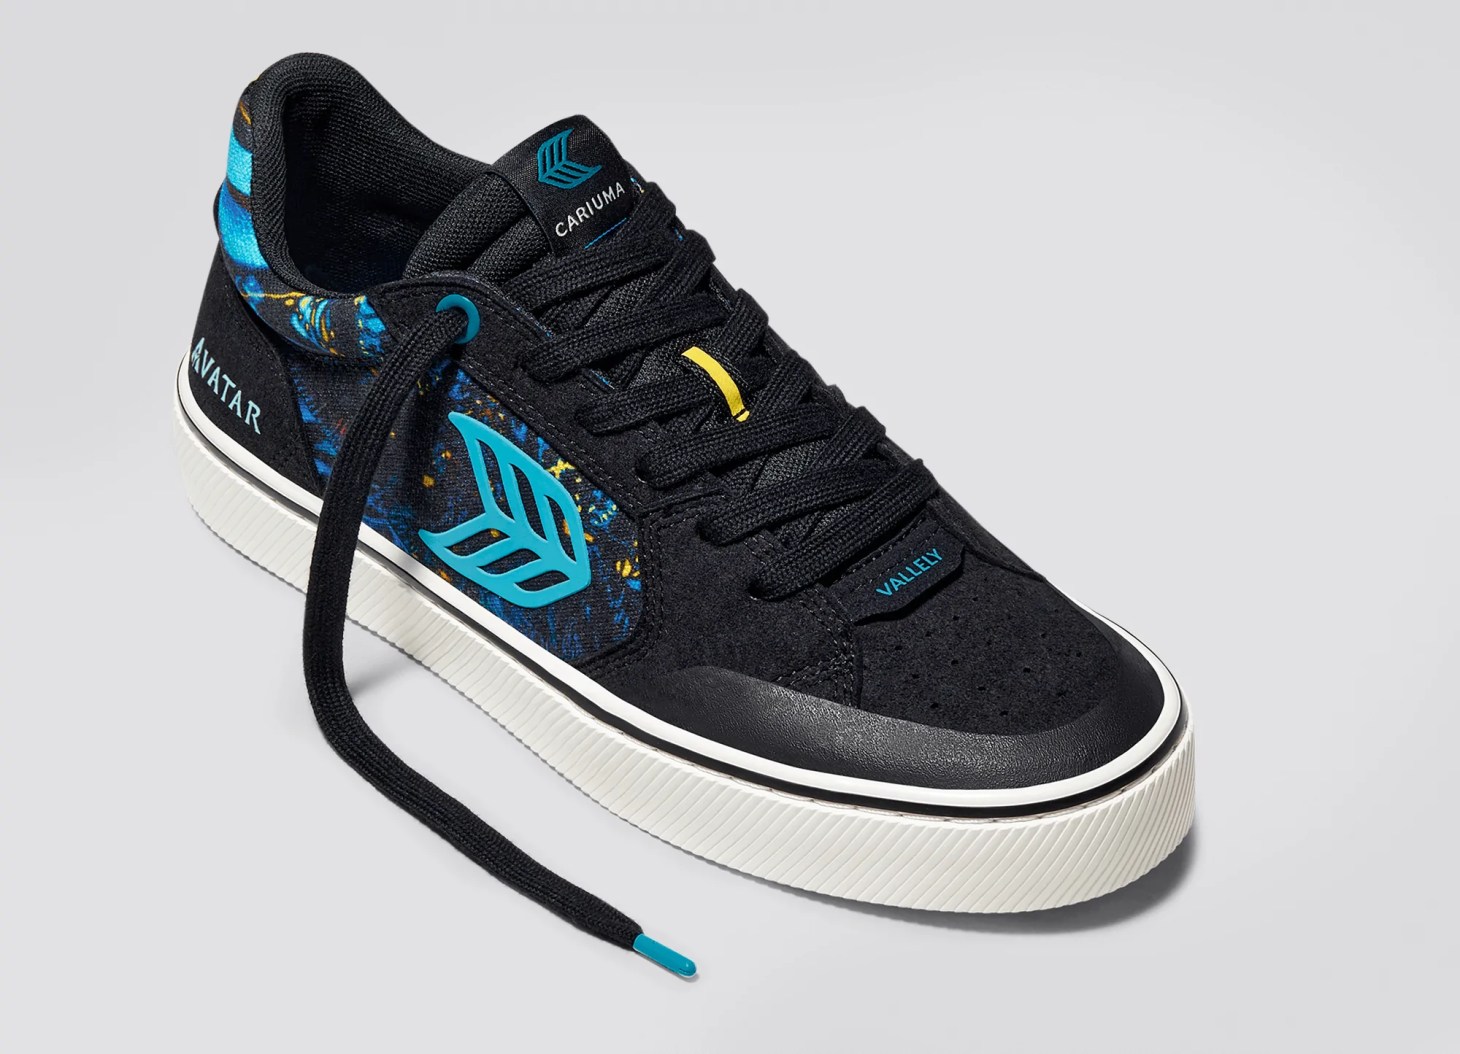 avatar vallely banshee sneaker from the cariuma spring collection